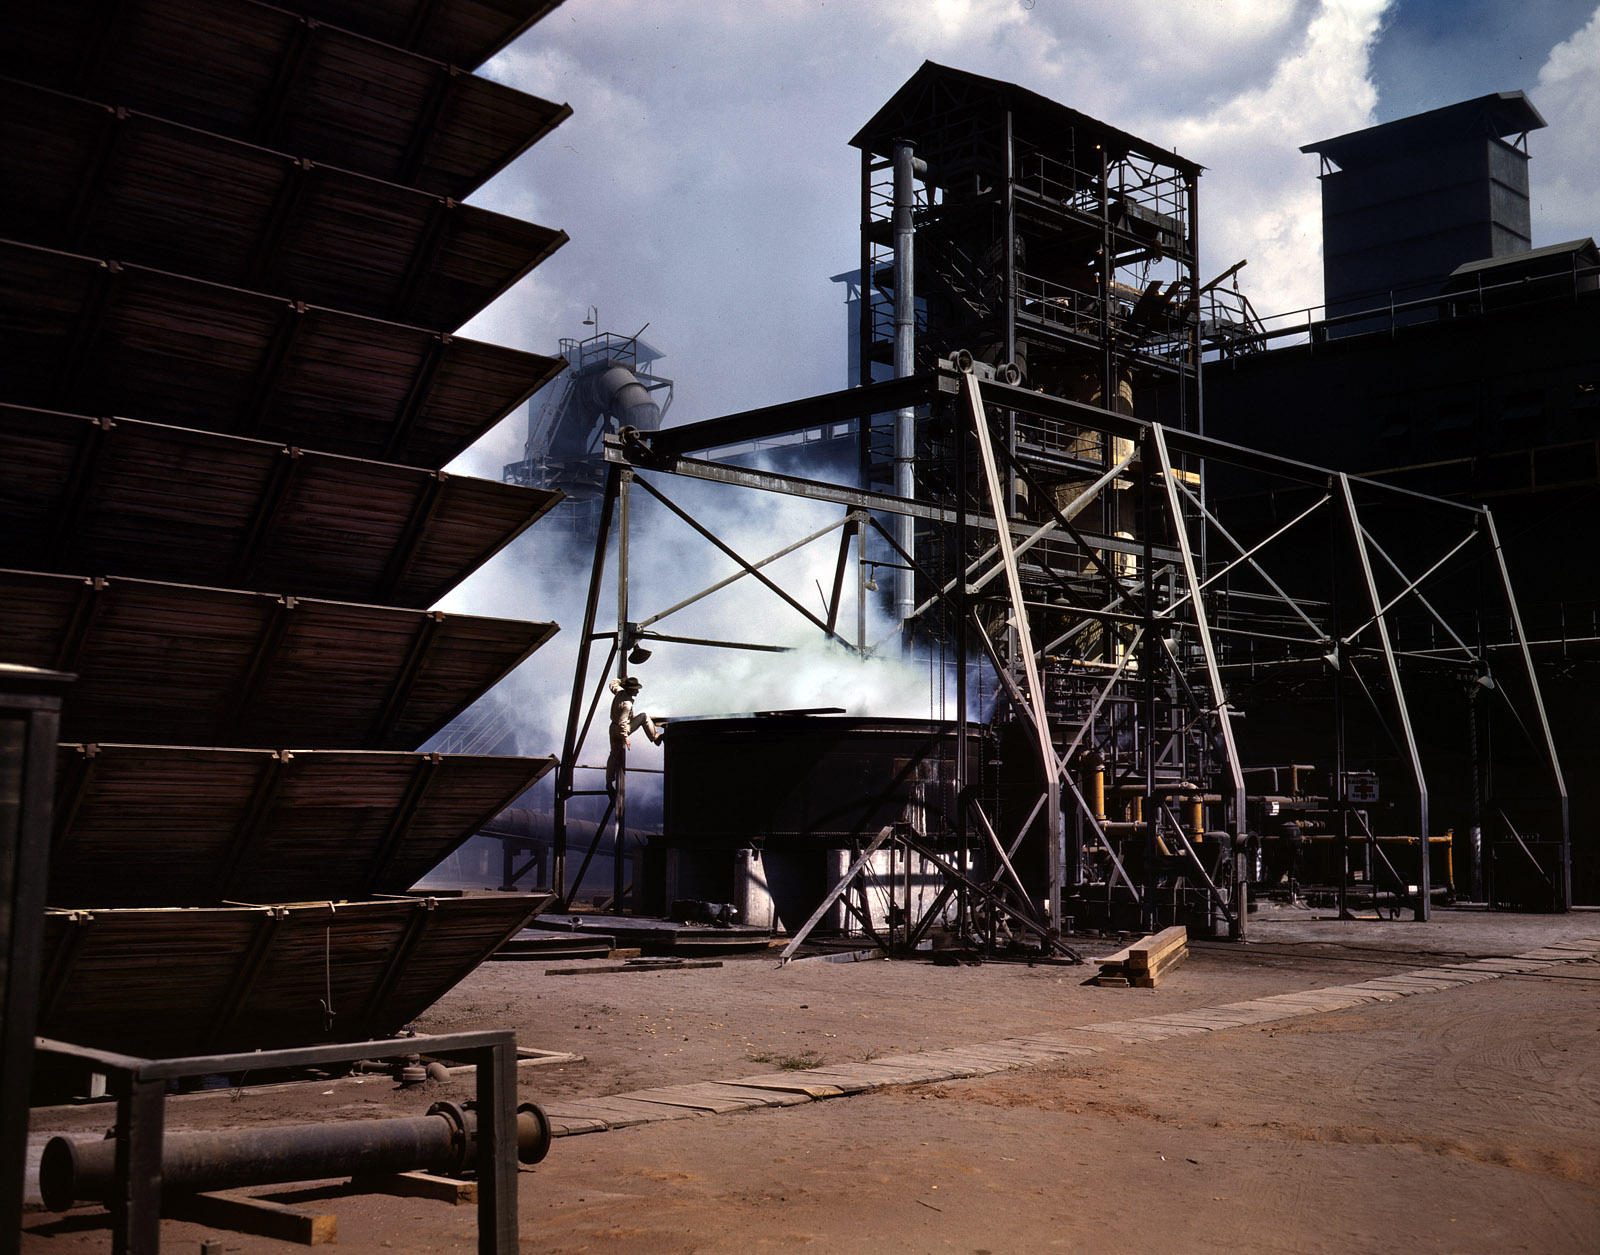 June 1942. "TVA chemical plant where elemental phosphorus is made. Vicinity of Muscle Shoals, Alabama." View full size. 4x5 Kodachrome transparency by Alfred Palmer for the Office of War Information.